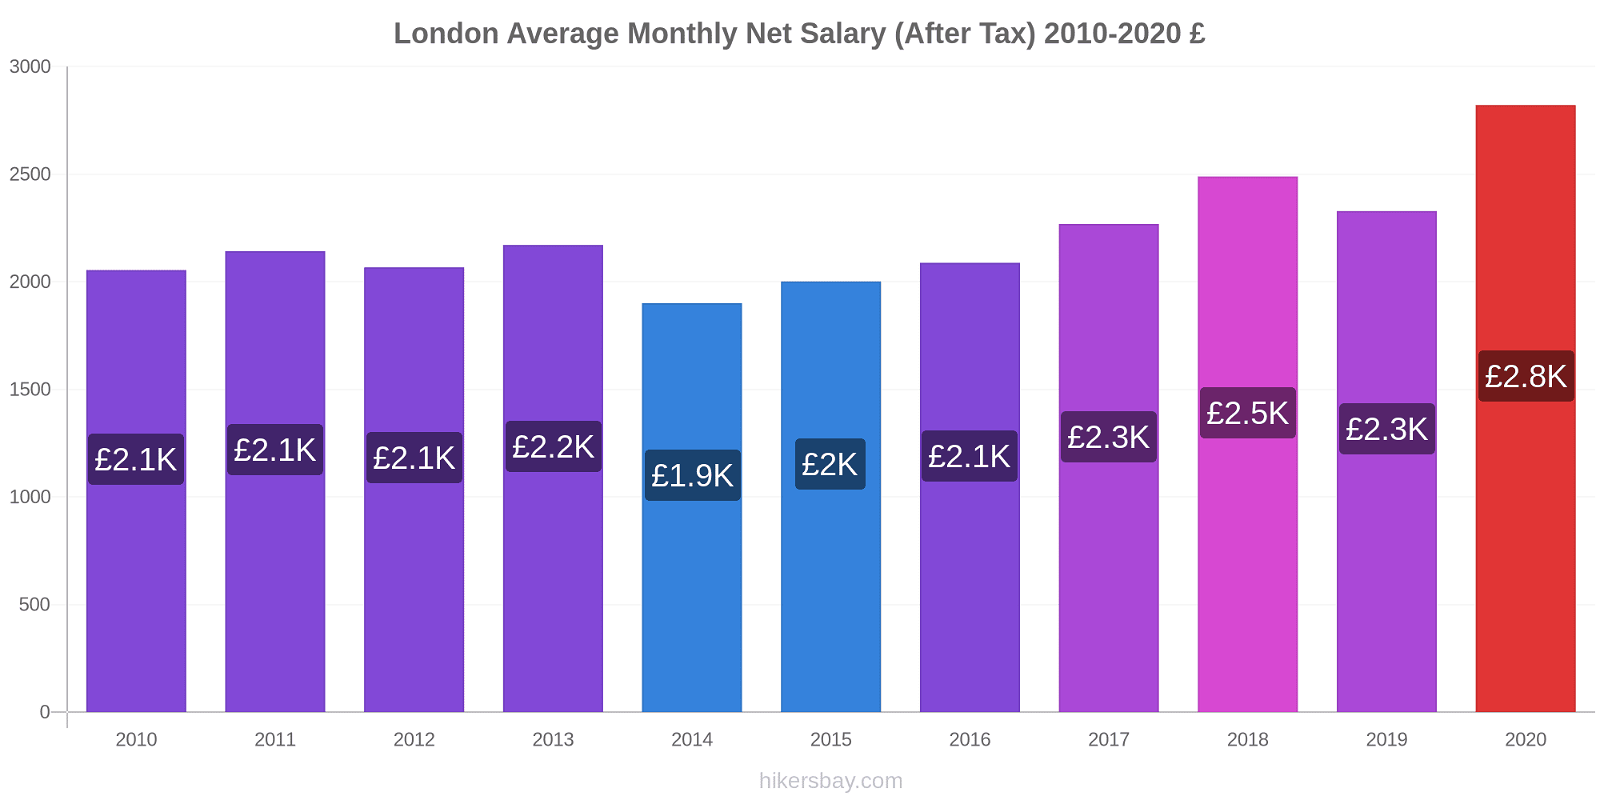 London price changes Average Monthly Net Salary (After Tax) hikersbay.com